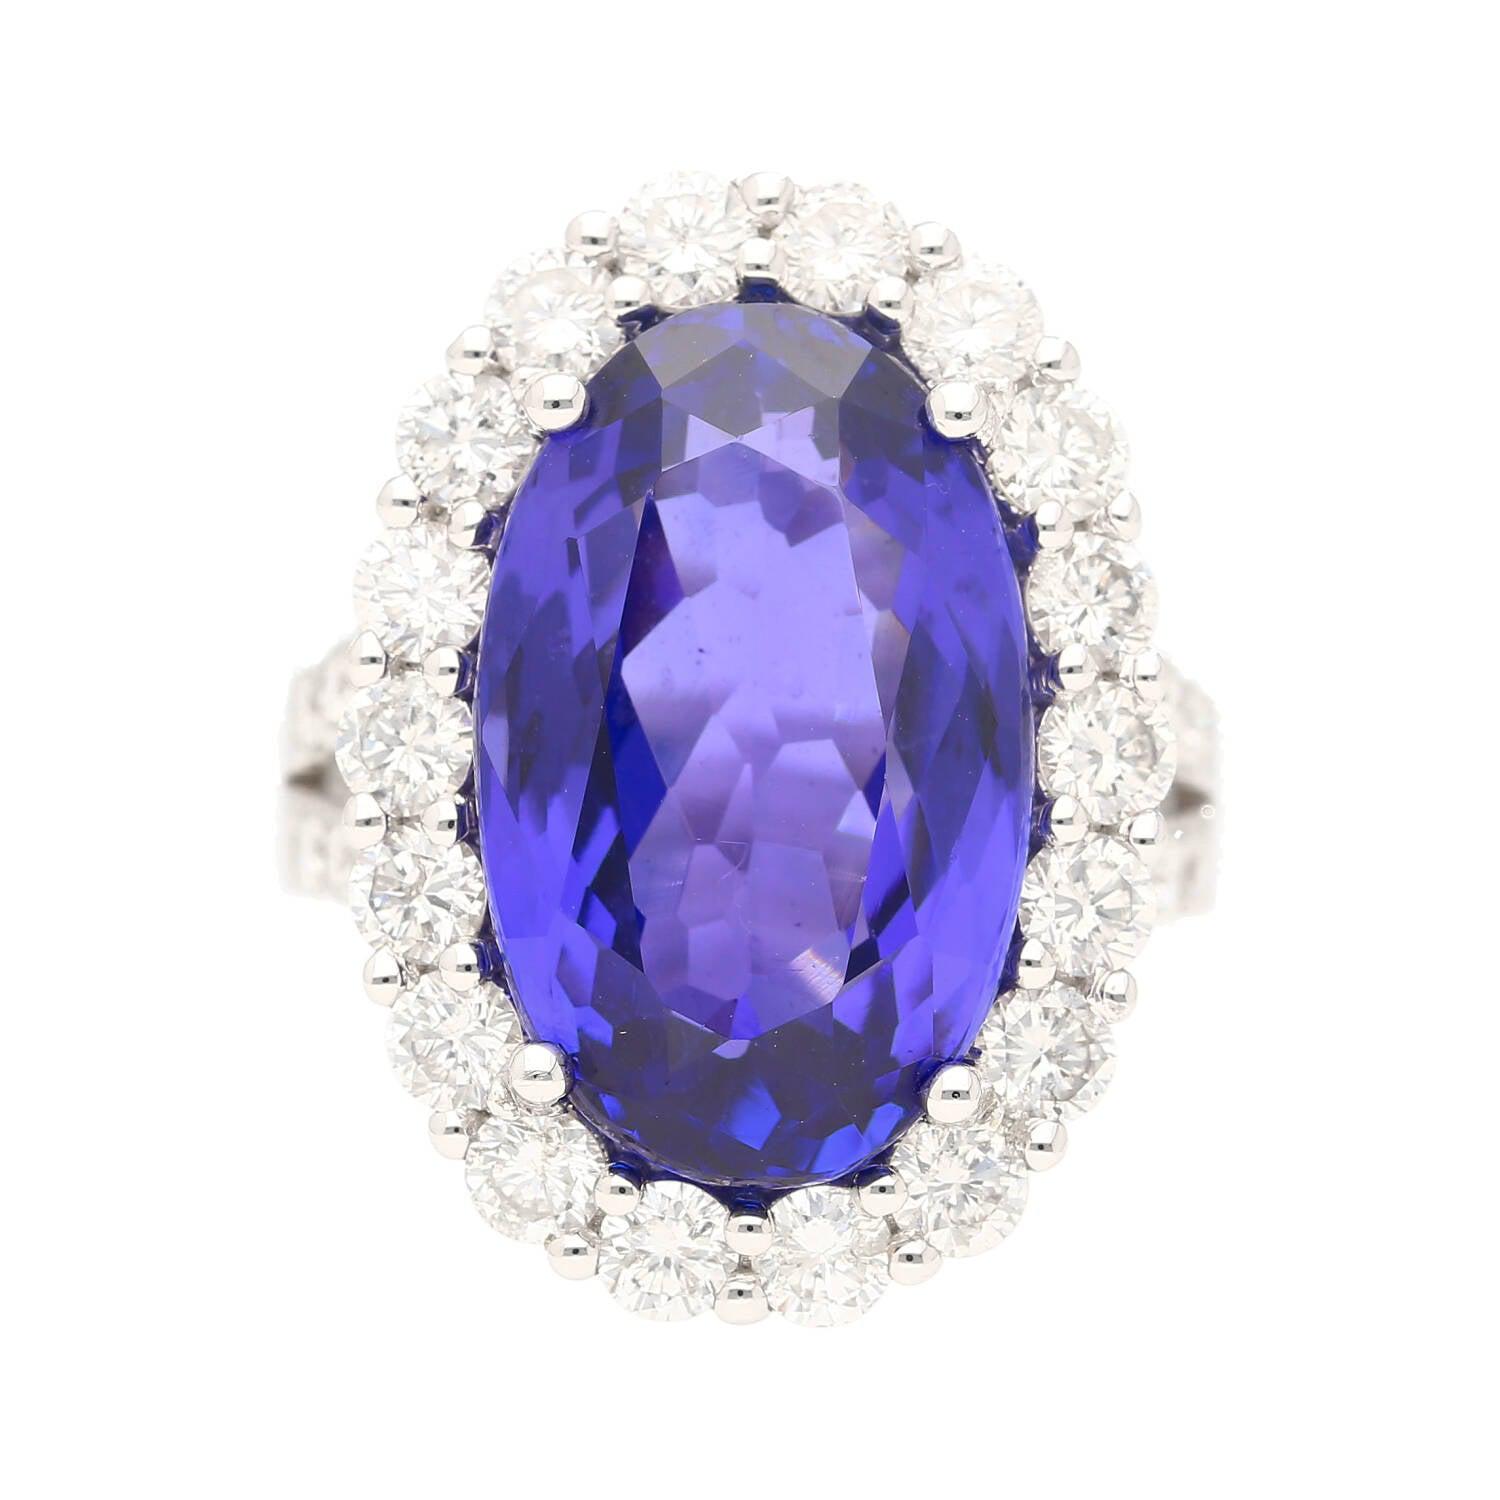 15_46-Carat-Oval-Cut-Fine-Tanzanite-and-Diamond-Halo-Ring-in-18k-White-Gold-With-Split-Shank-Setting-Rings.jpg